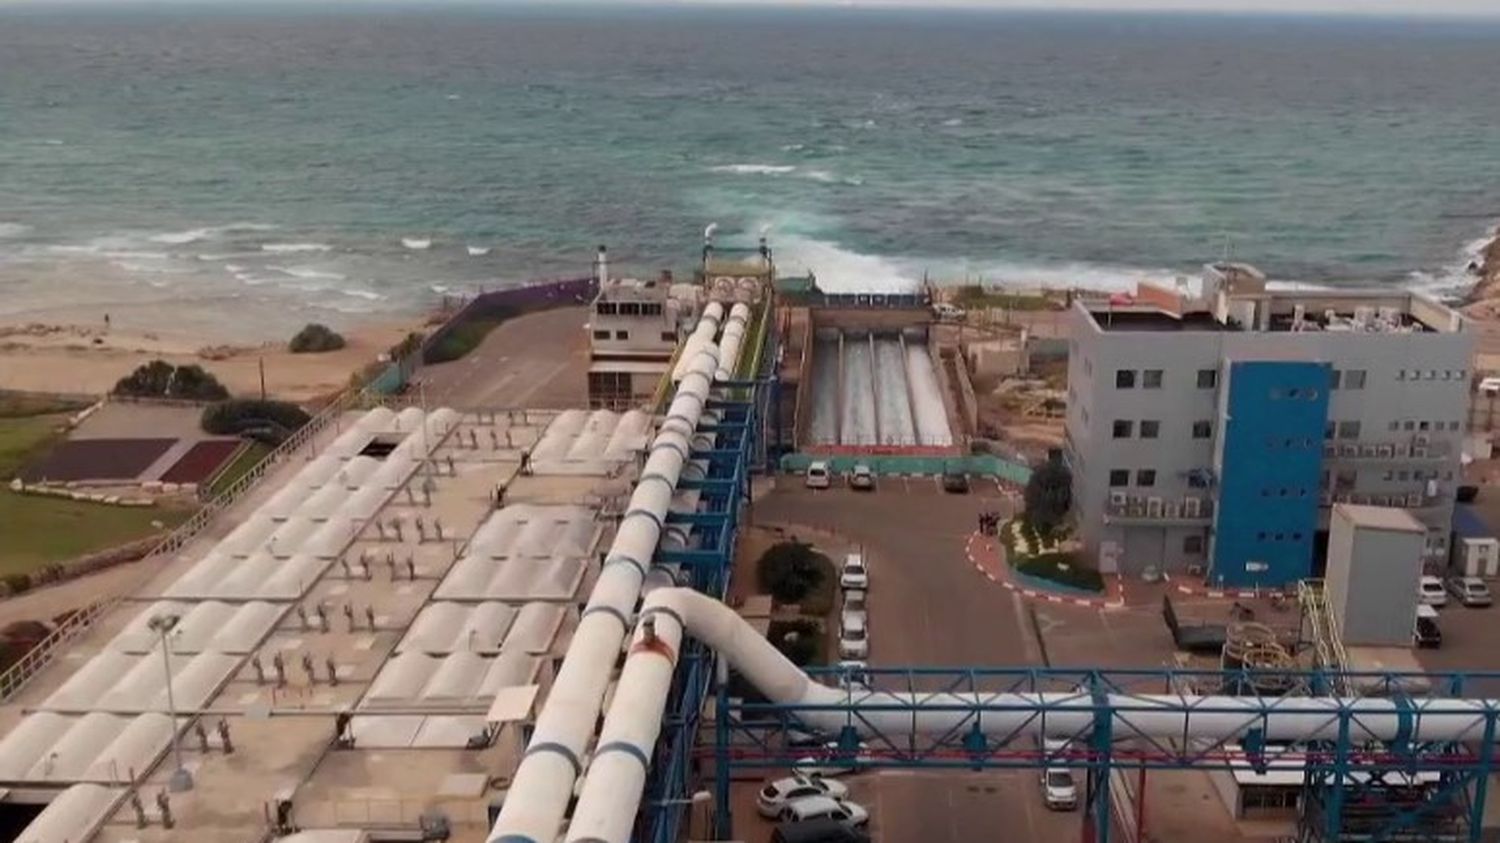 Drought: seawater desalination stations, a controversial solution
